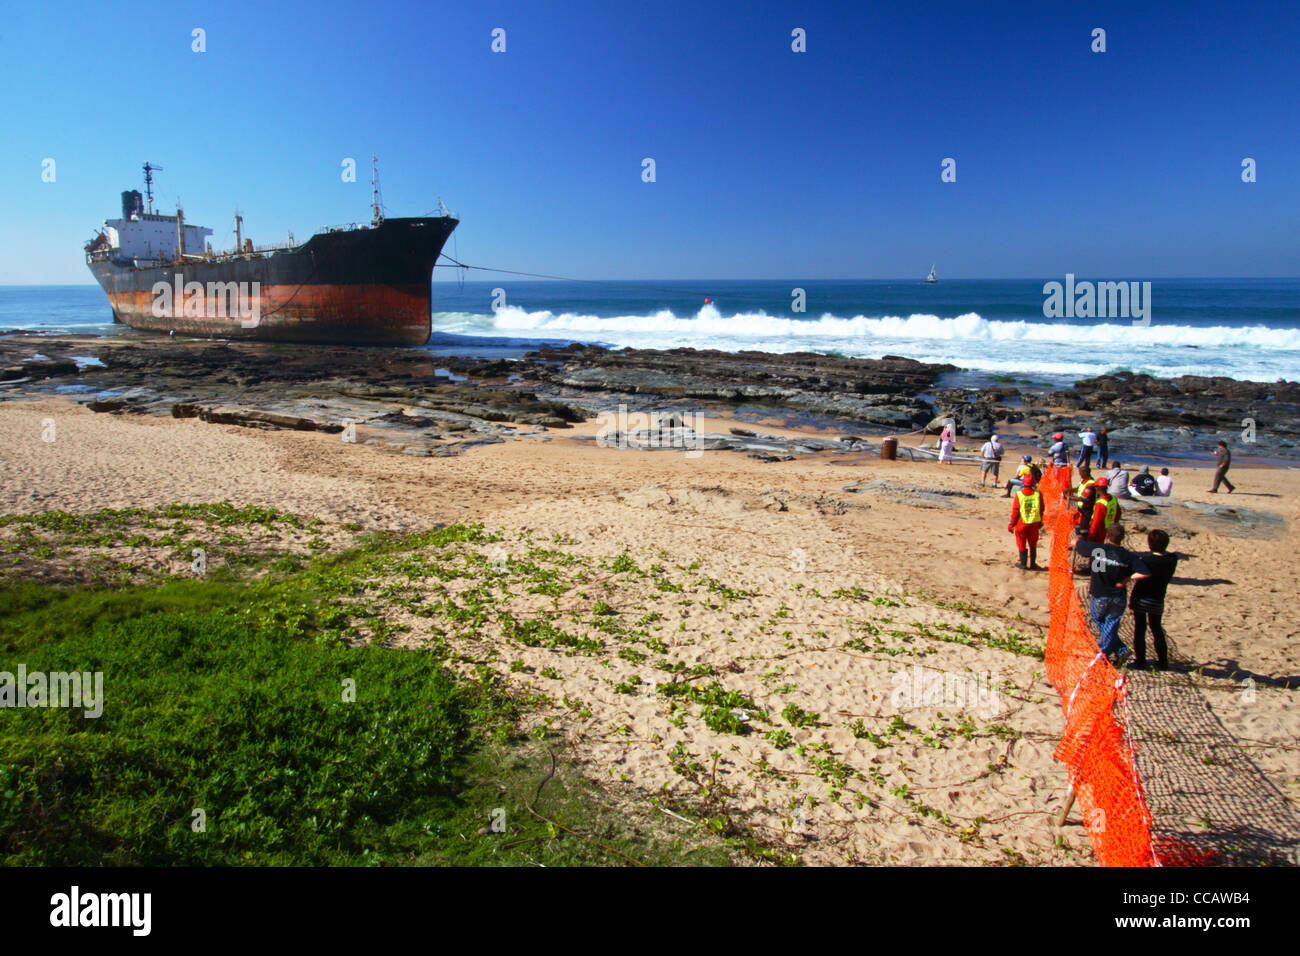 The MT Phoenix which ran aground at Sheffield Beach, North of Durban on the Kwazulu Natal North Coast, South Africa Stock Photo